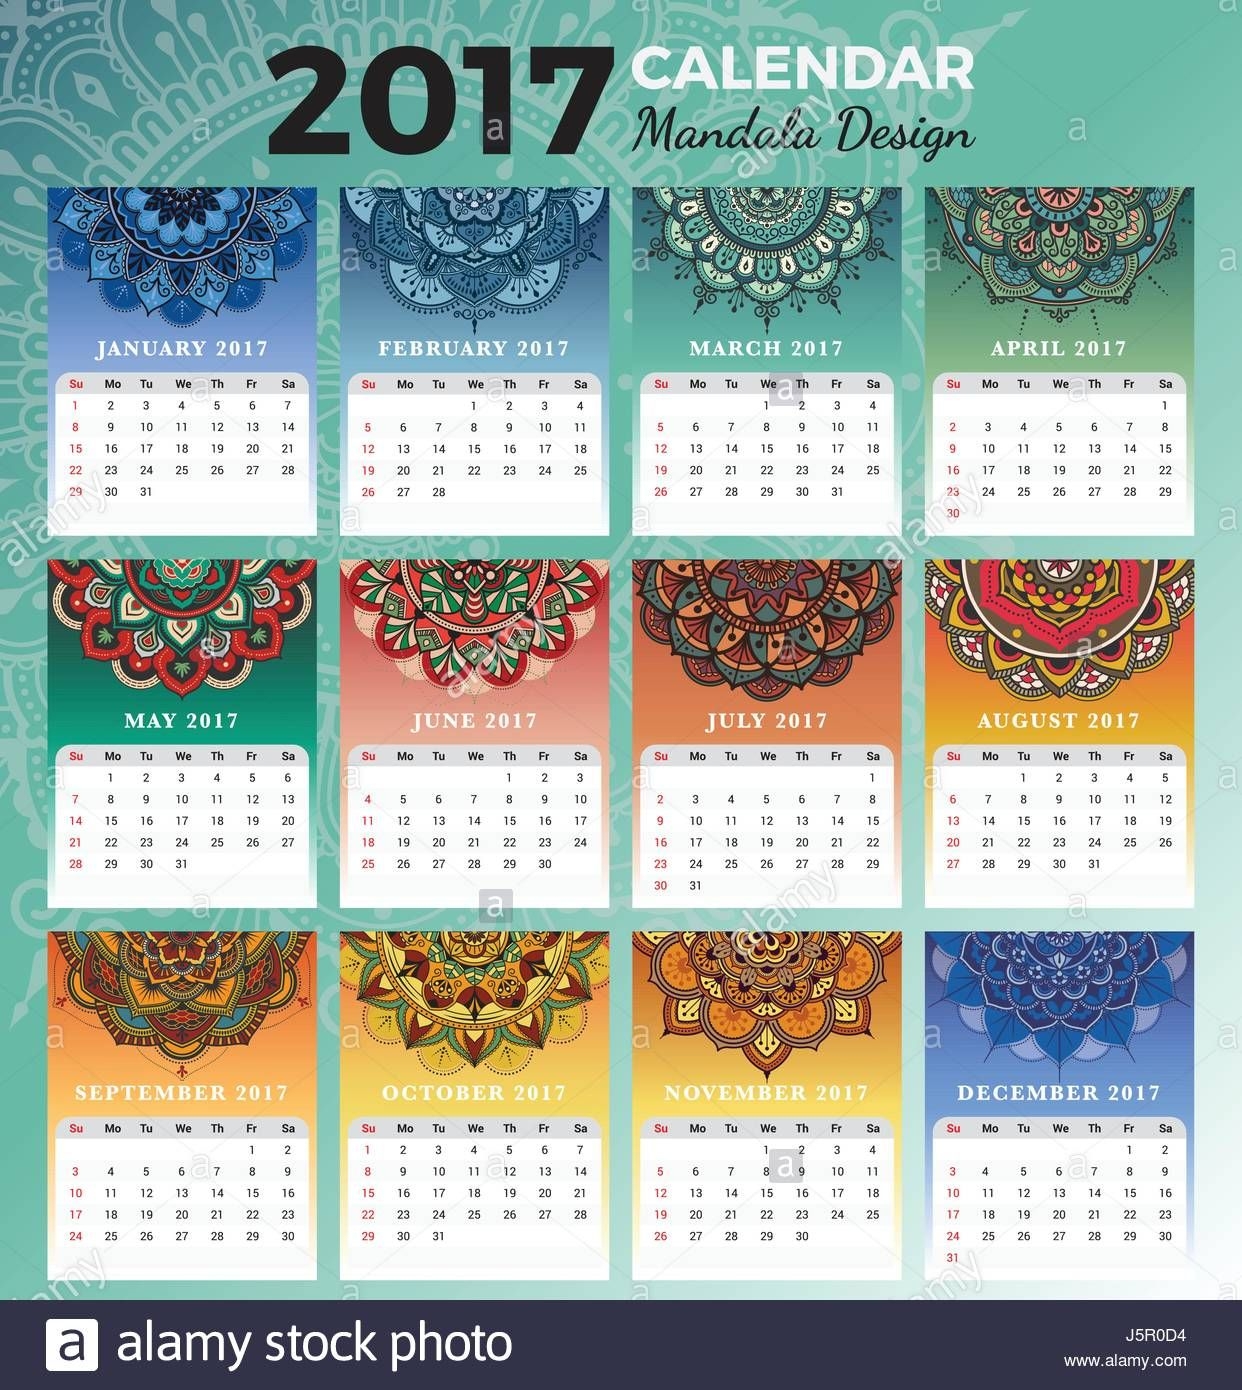 Printable Monthly Calendar 2017 Design With Colors Of